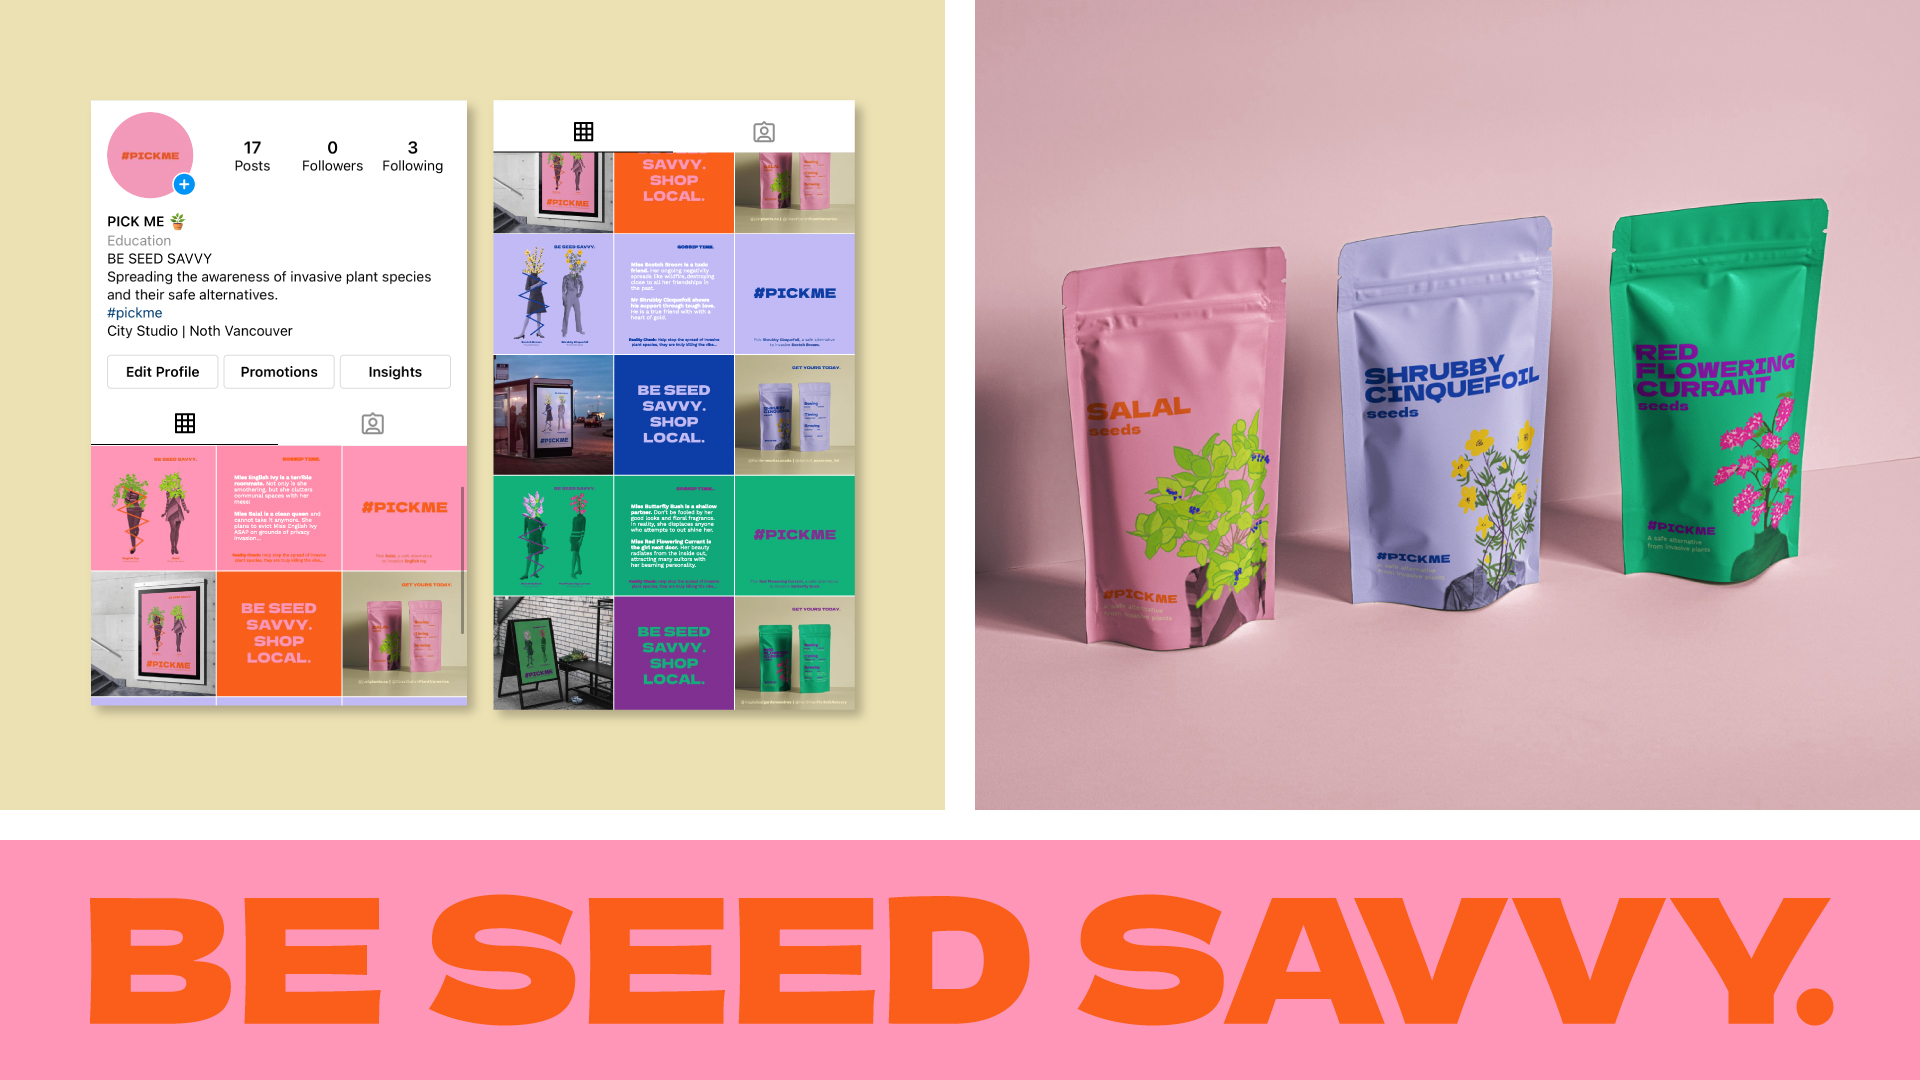 On the top left are two pages from #PICKME’s Instagram account. On the top right are three seed packages, each containing seeds of one safe, B.C. native plant species. Centered at the bottom is #PICKME’s tagline, “Be Seed Savvy.”